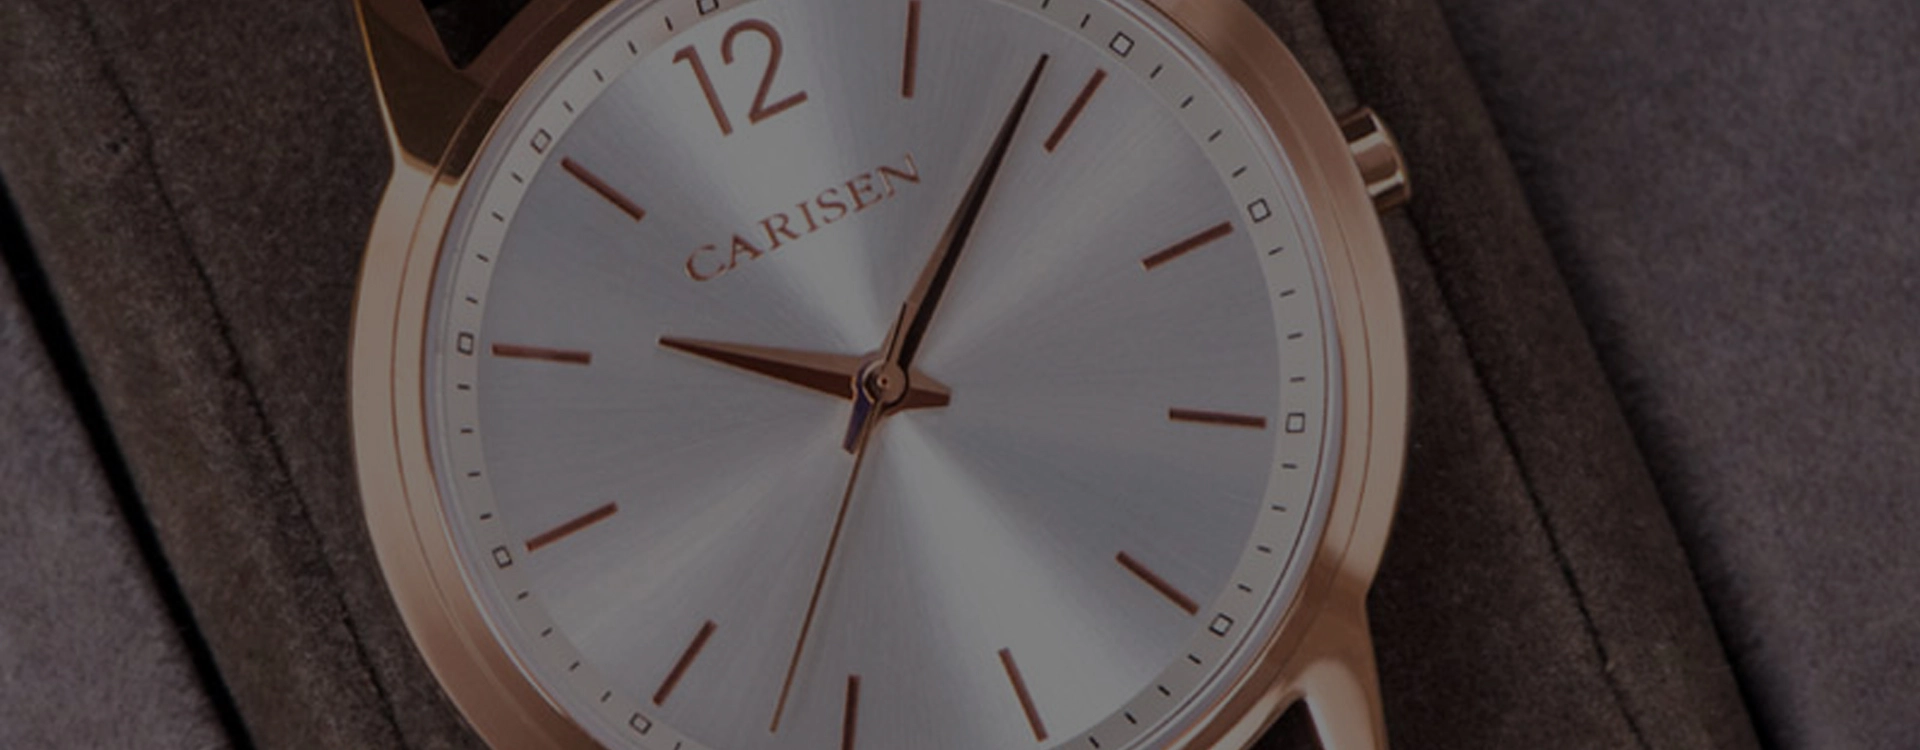 Explore the Meticulous Craftsmanship behind Carisen's High-End Watches